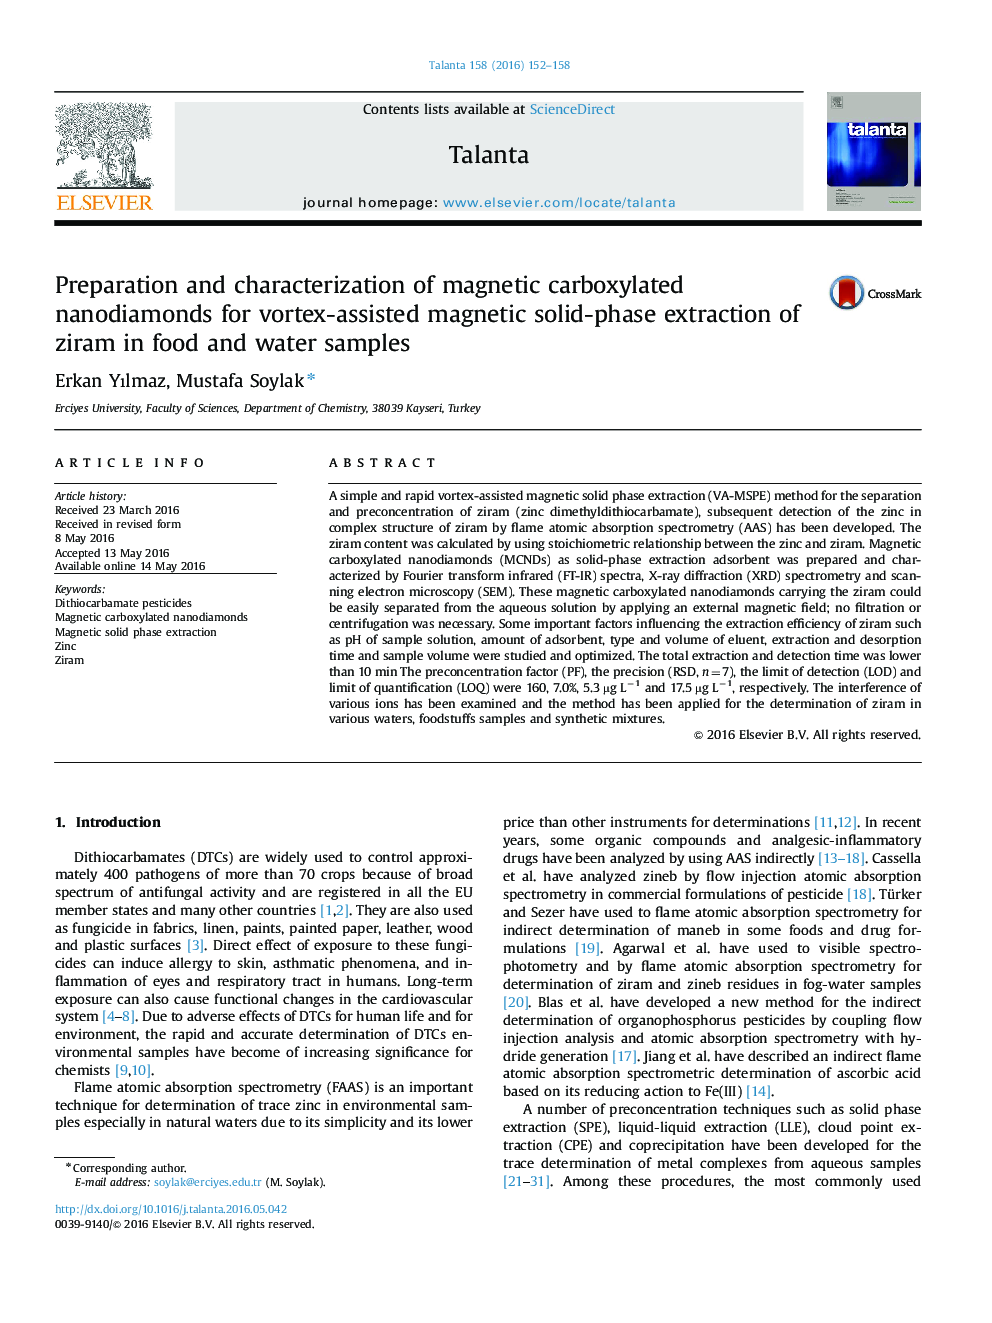 Preparation and characterization of magnetic carboxylated nanodiamonds for vortex-assisted magnetic solid-phase extraction of ziram in food and water samples